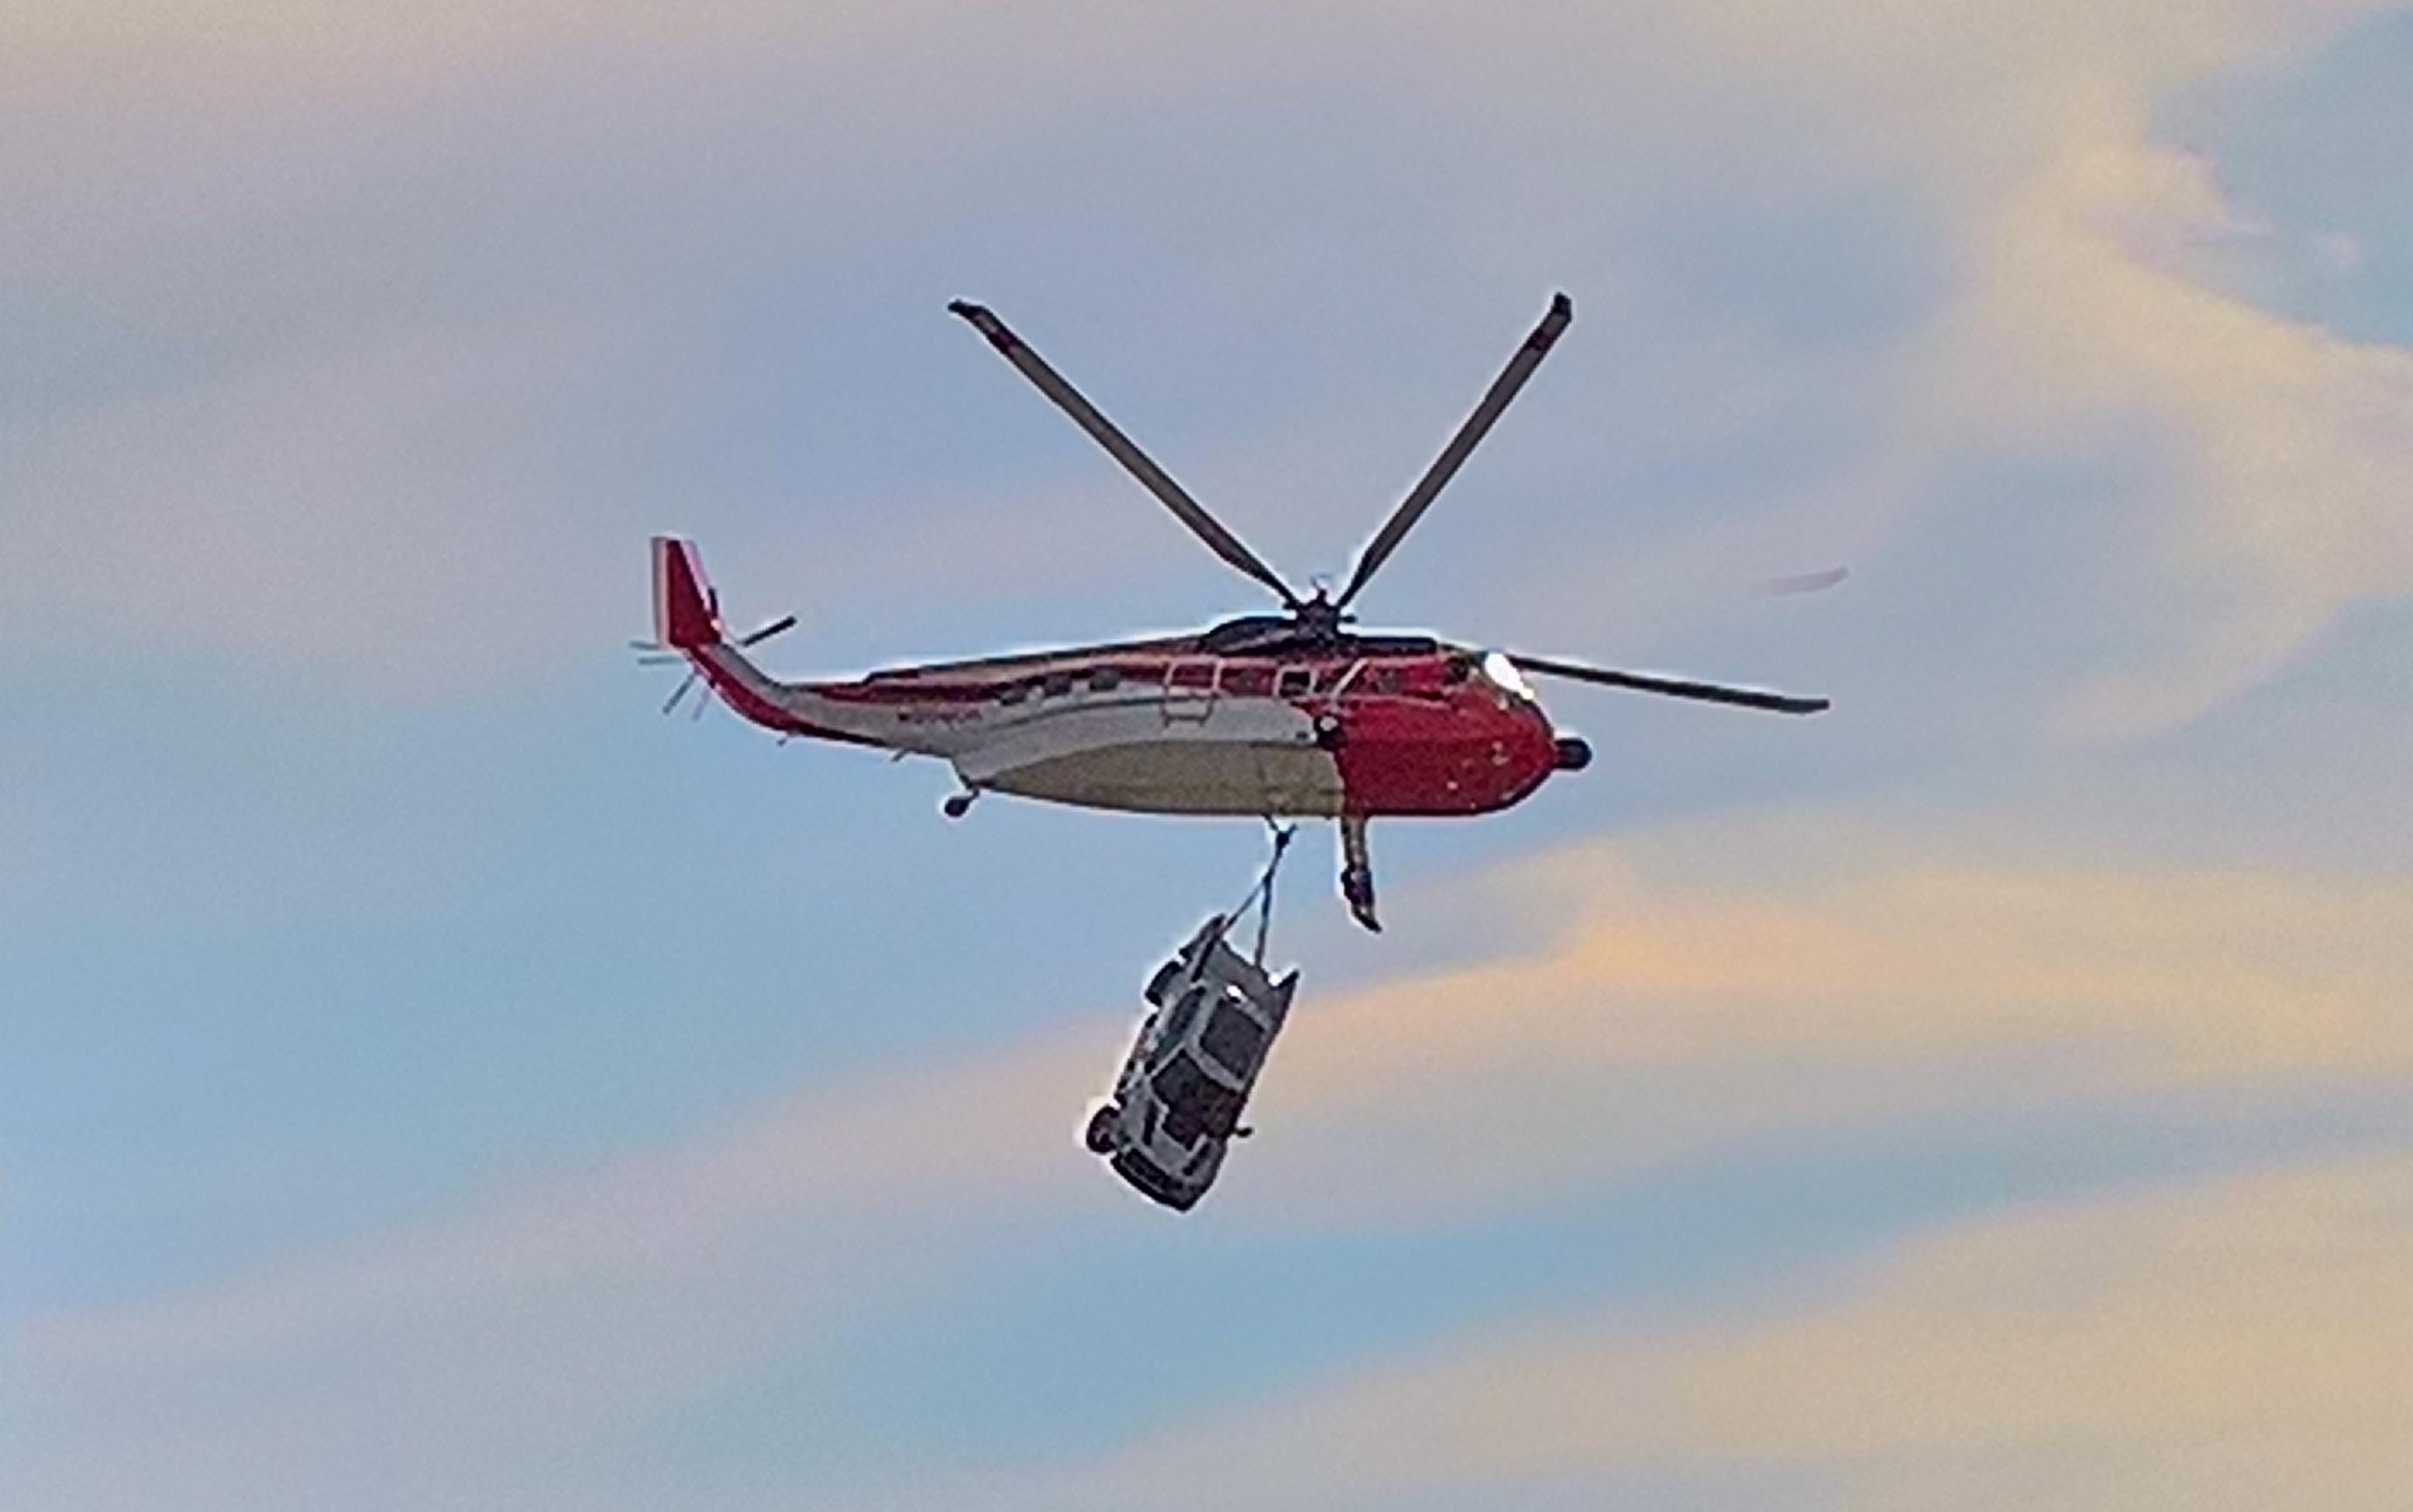 http://www.nyspeed.com/pictures/chopper.jpg